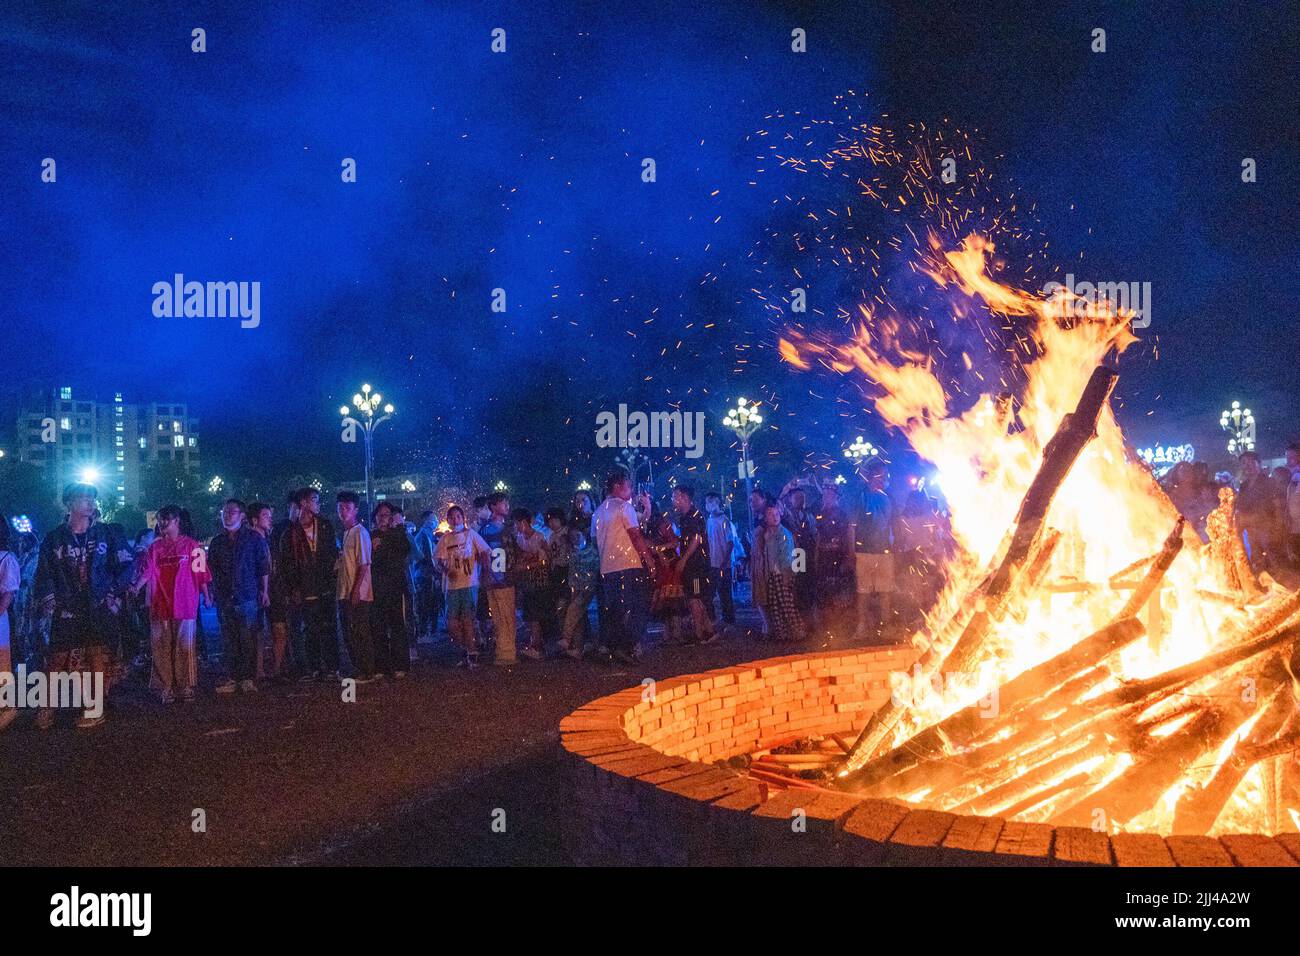 BIJIE, CHINA - JULY 22, 2022 - People of yi ethnic group celebrate the Torch Festival with tourists at baili Azalea Management Area in Bijie city, Sou Stock Photo